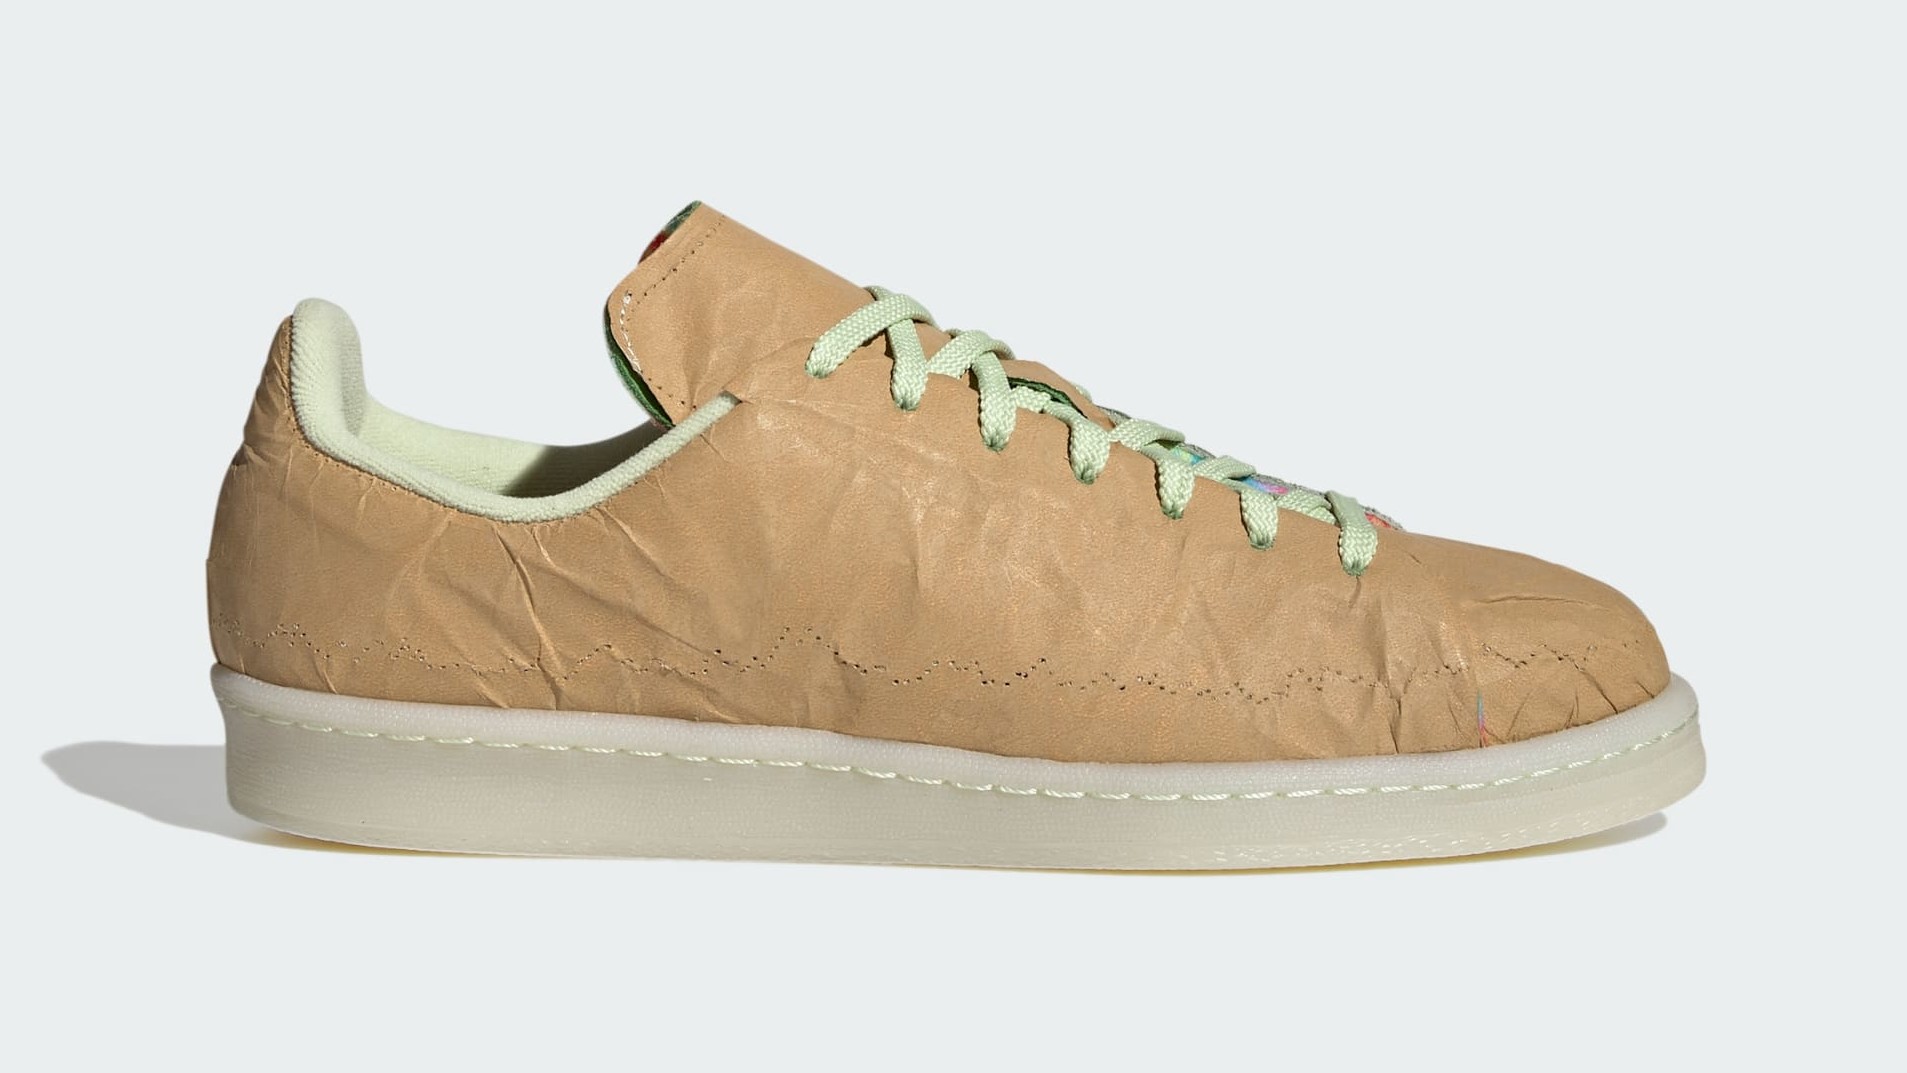 The 'Crop' Adidas Campus 80s Feature Rolling Paper Uppers